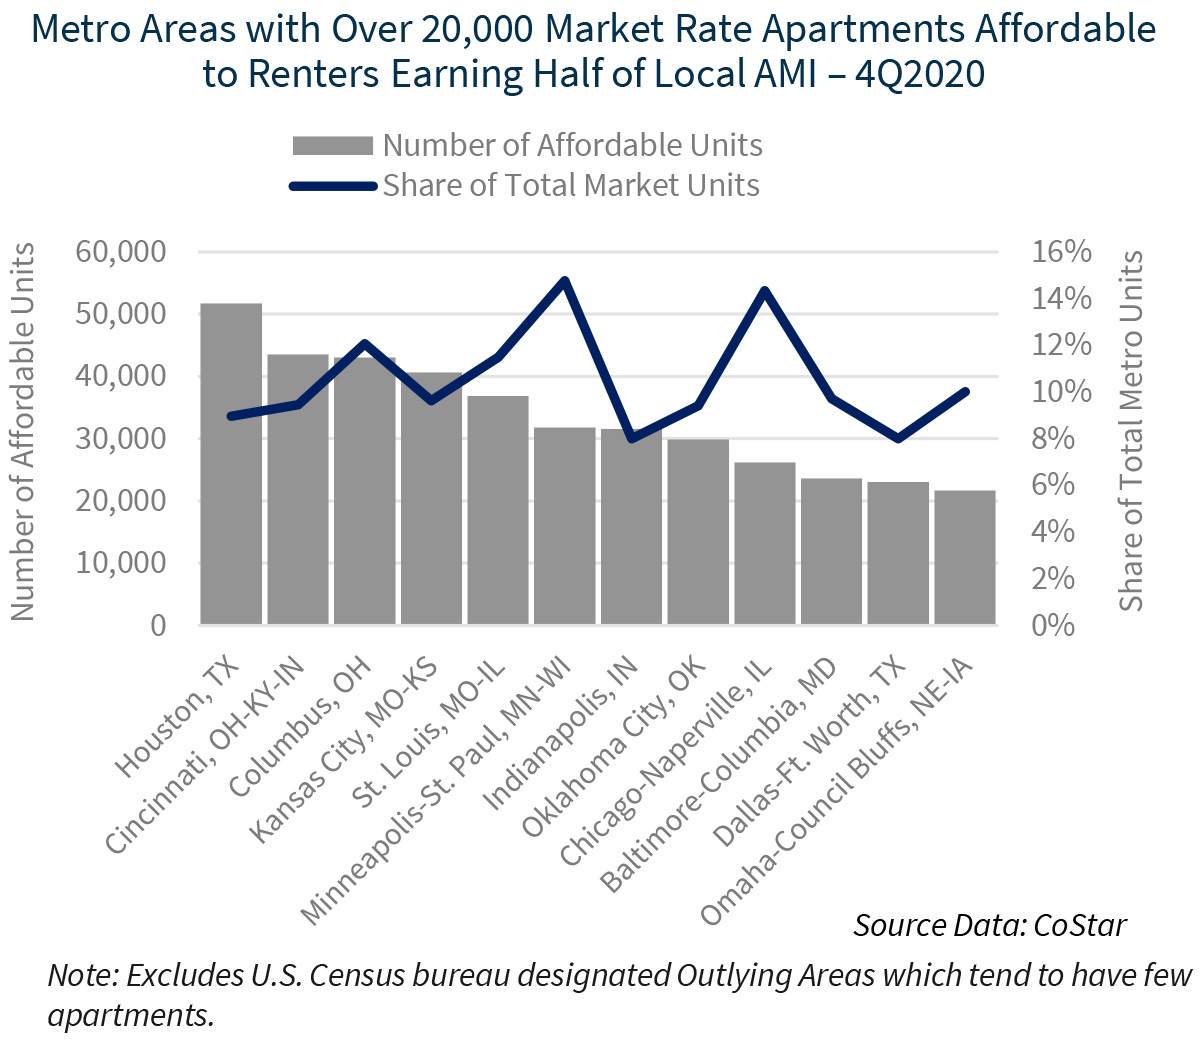 Metro Areas with Over 20,000 Market Rate Apartments Affordable to Renters Earning Half of Local AMI – 4Q2020